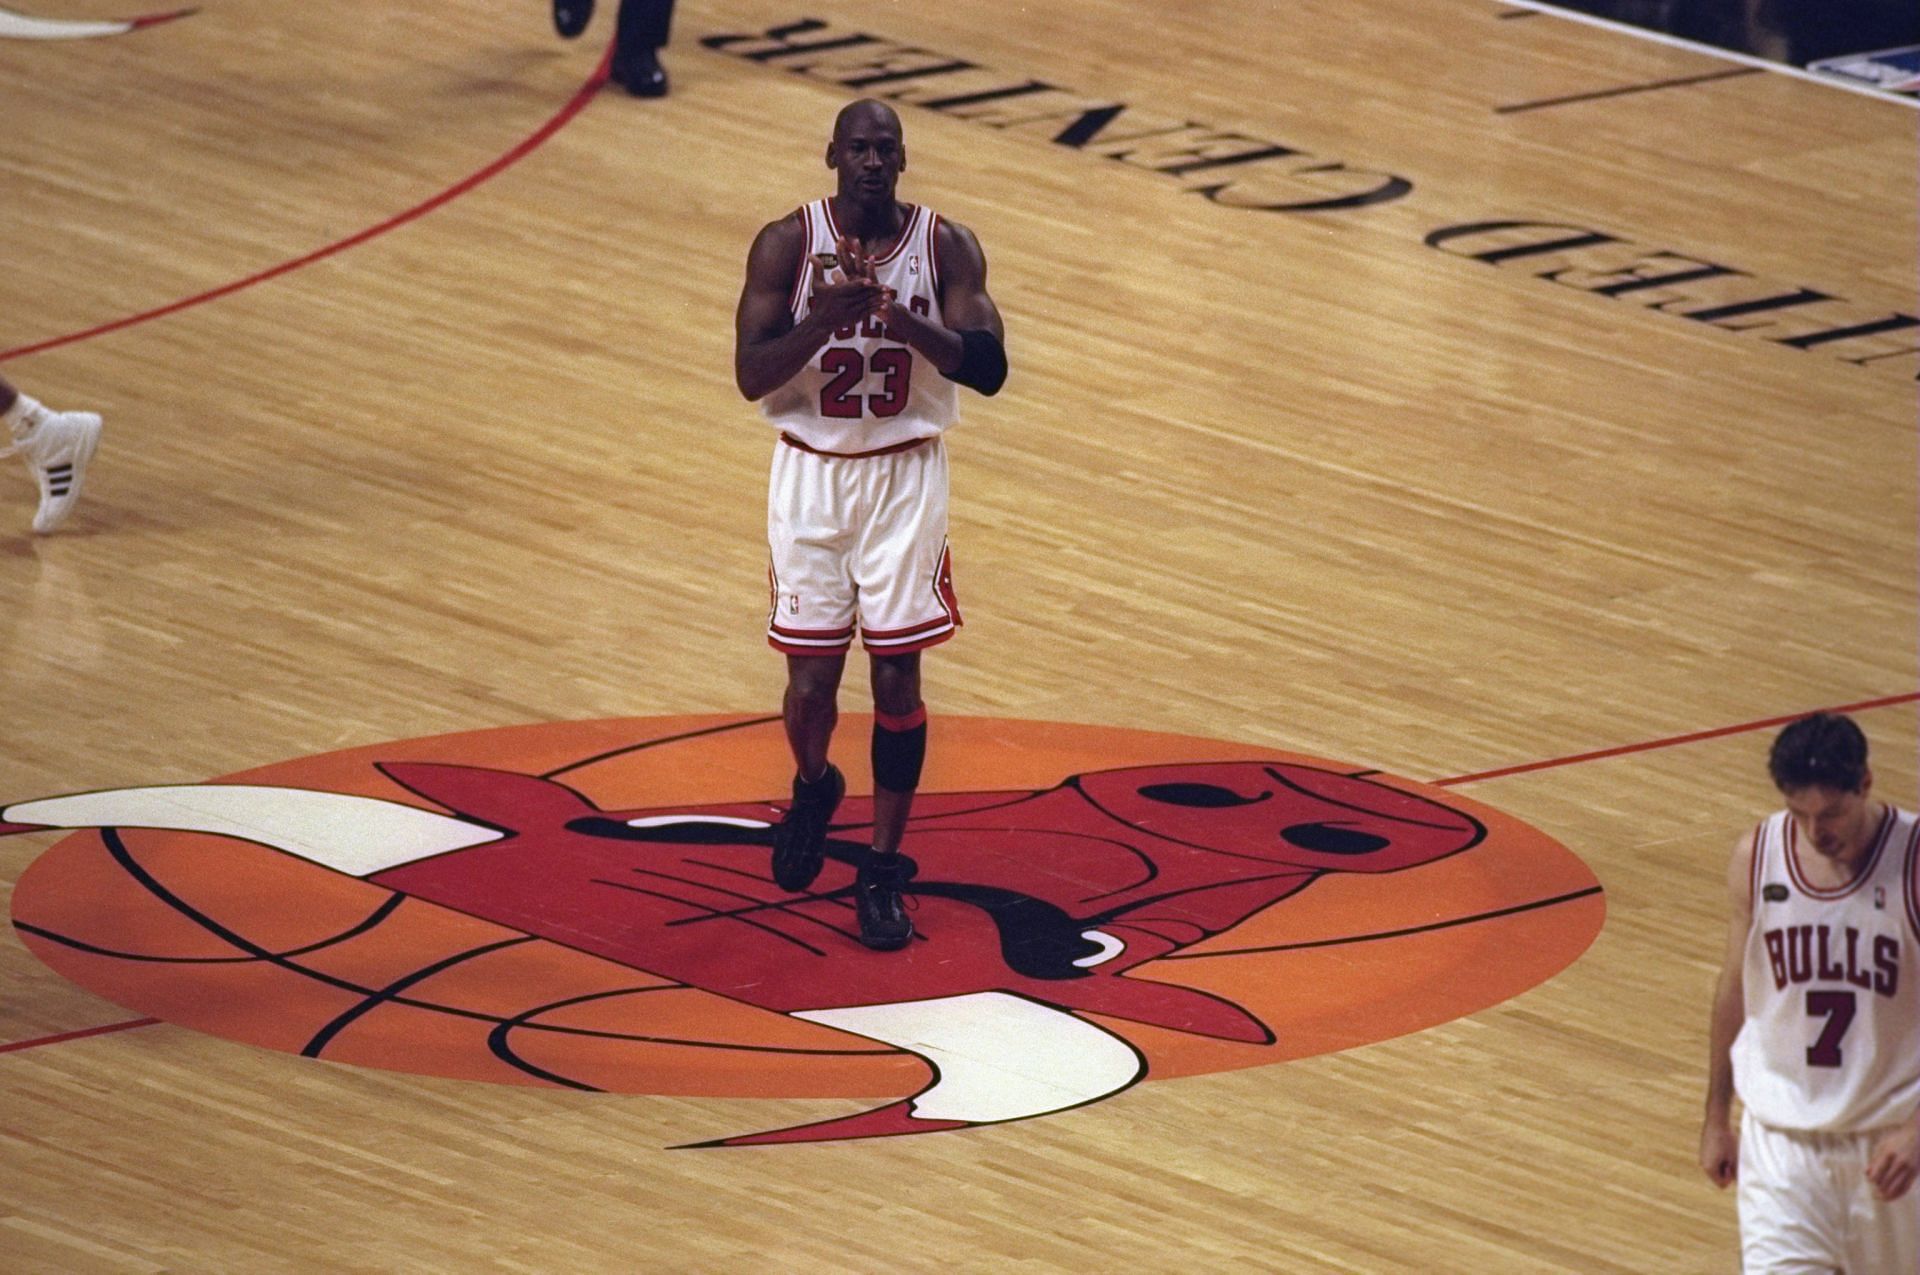 Michael Jordan of the Chicago Bulls walks on the court during the 1998 NBA Finals Game 3 against the Utah Jazz